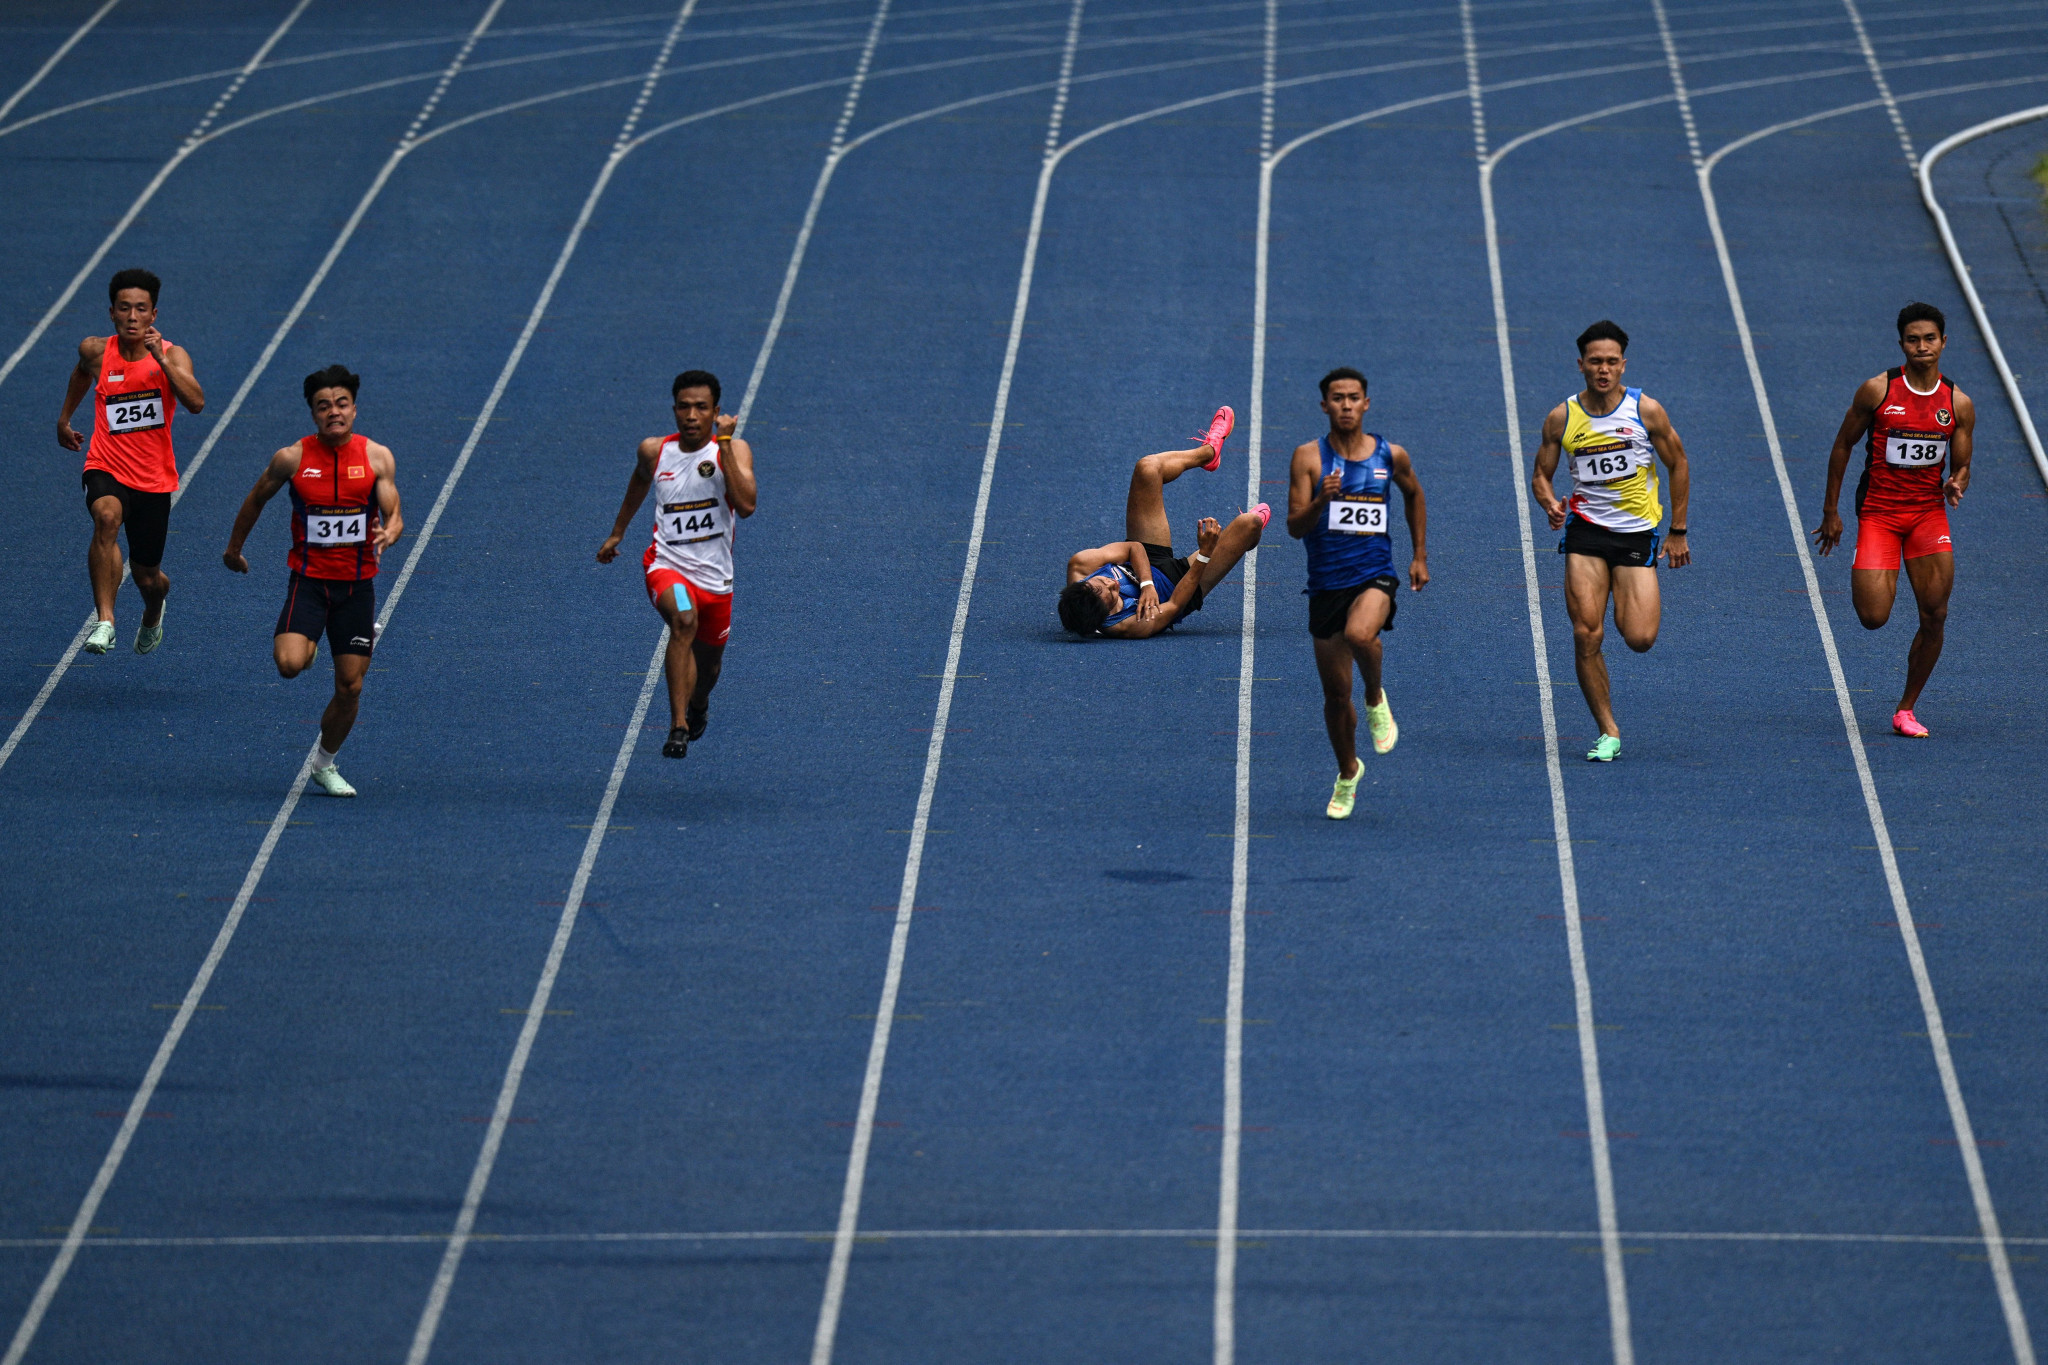 Soraoat Dapbang, third from right, benefitted from Puripol Boonson's fall to win 200m gold ©Getty Images